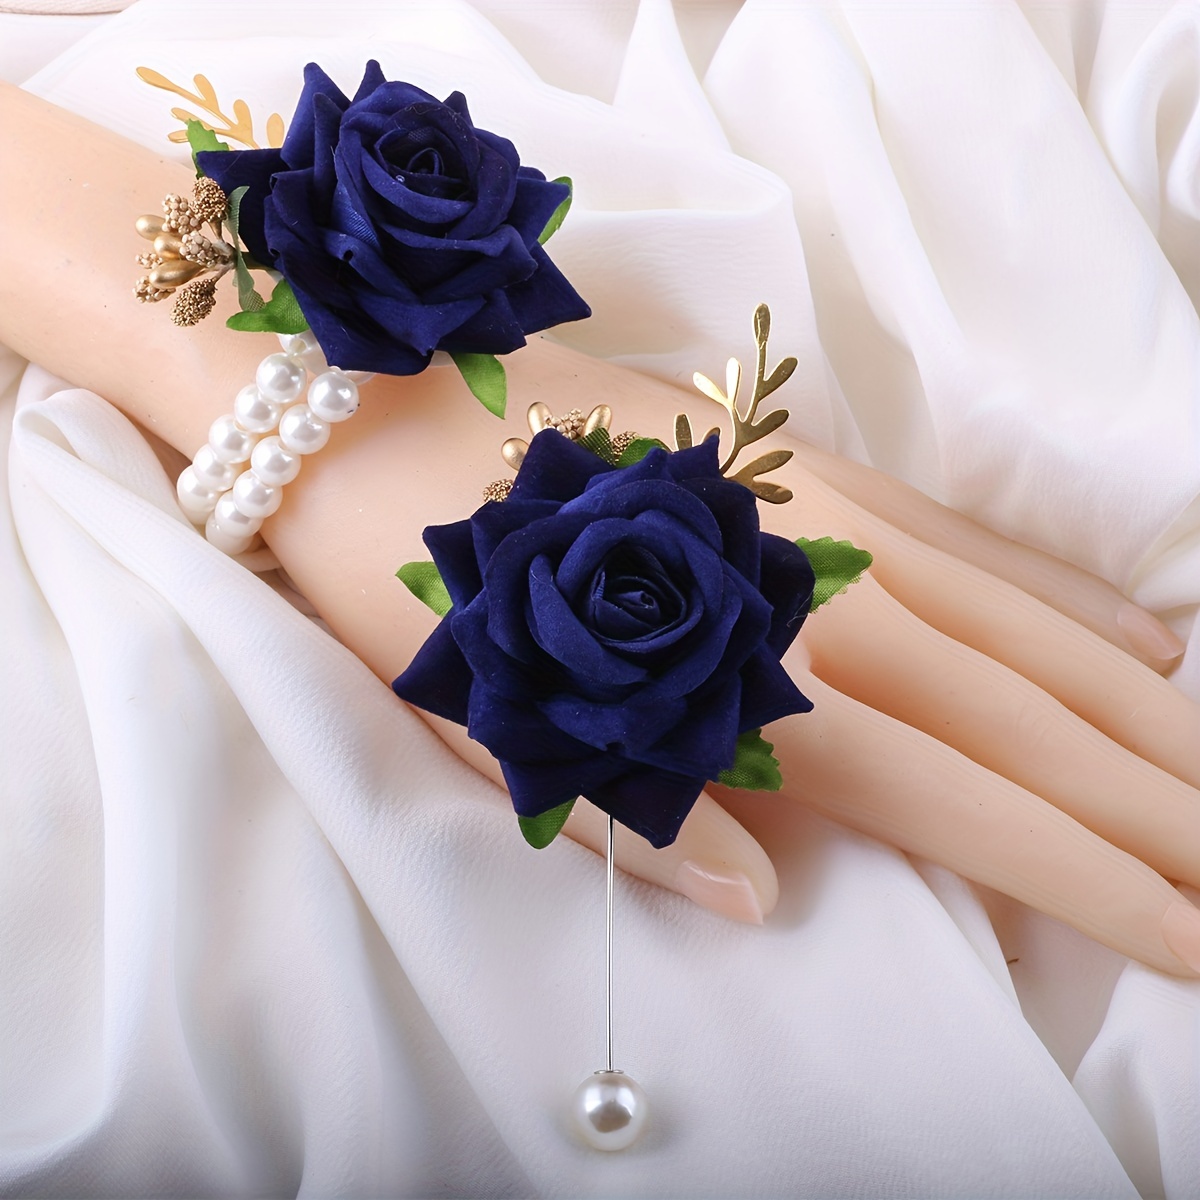 Silk Roses Wrist Corsage Bracelets Wedding Boutonnieres Bridesmaid Groom  White Blue Hand Flowers Marriage Prom Accessories